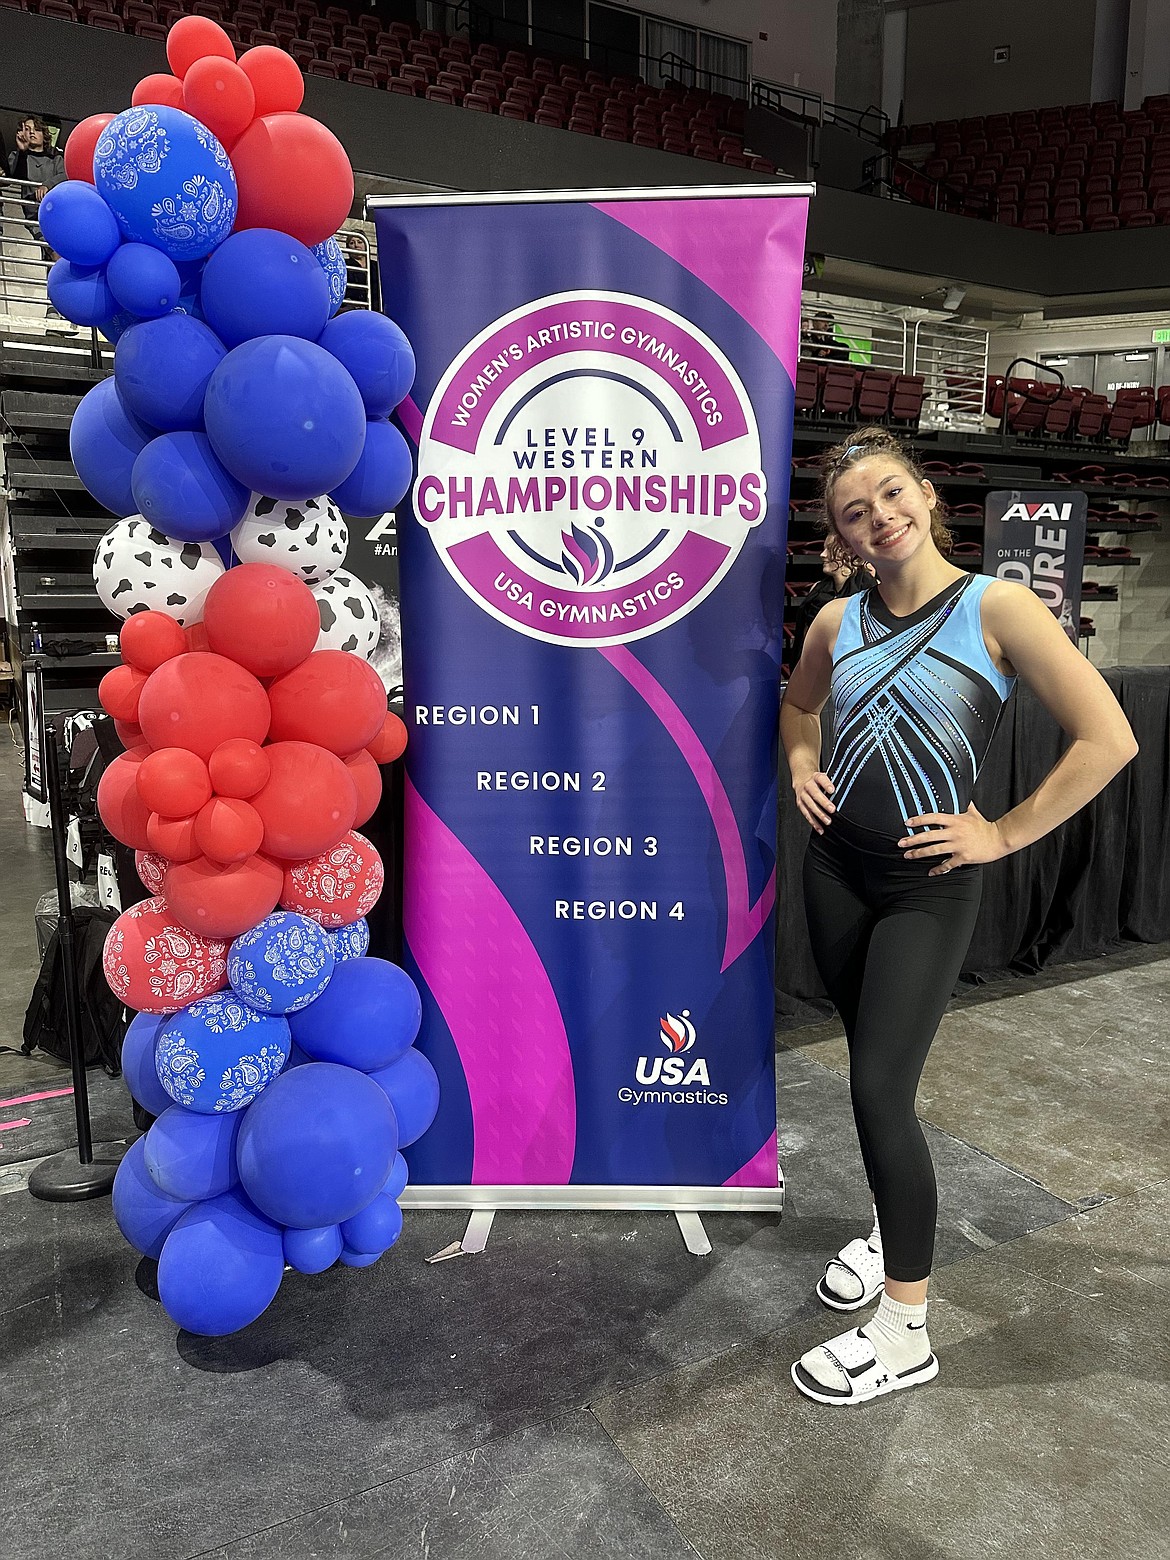 Courtesy photo
Avant Coeur Gymnastics Level 9 Jazzy Quagliana competed at Western Nationals in Boise. She had a high of 9.125 on Bars and a high of 9.3 on Beam.